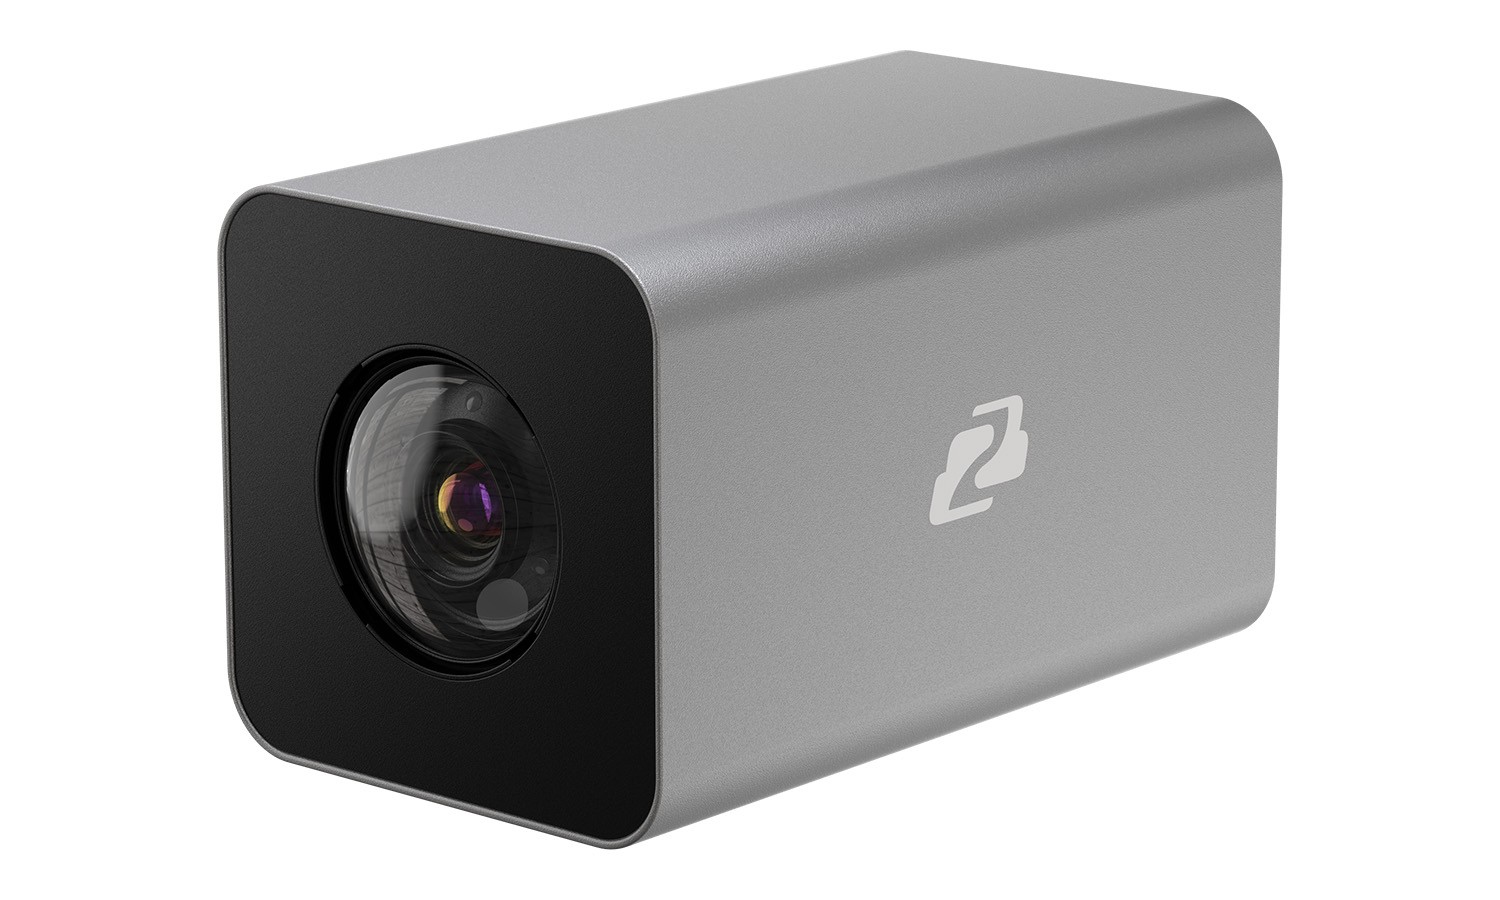 BG-B30SHAN 1080P Full HD 30X Zoom HDMI/SDI/IP/NDI|HX Box Camera with Audio Input by BZBGEAR